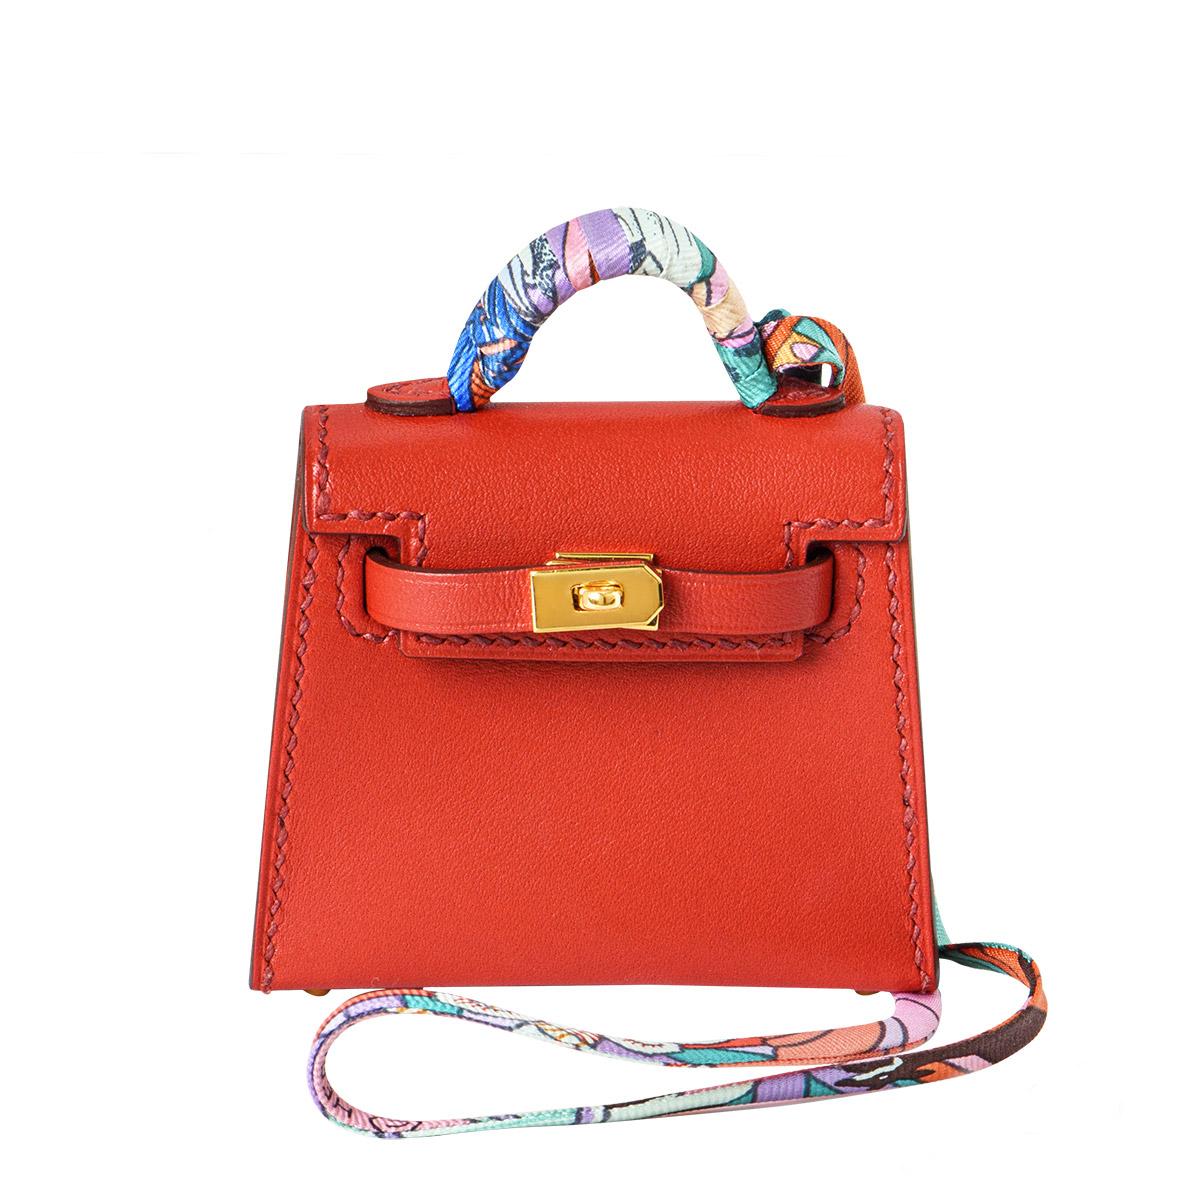 Hermès Sanguine Mini Kelly Twilly Bag Charm In Excellent Condition For Sale In London, GB